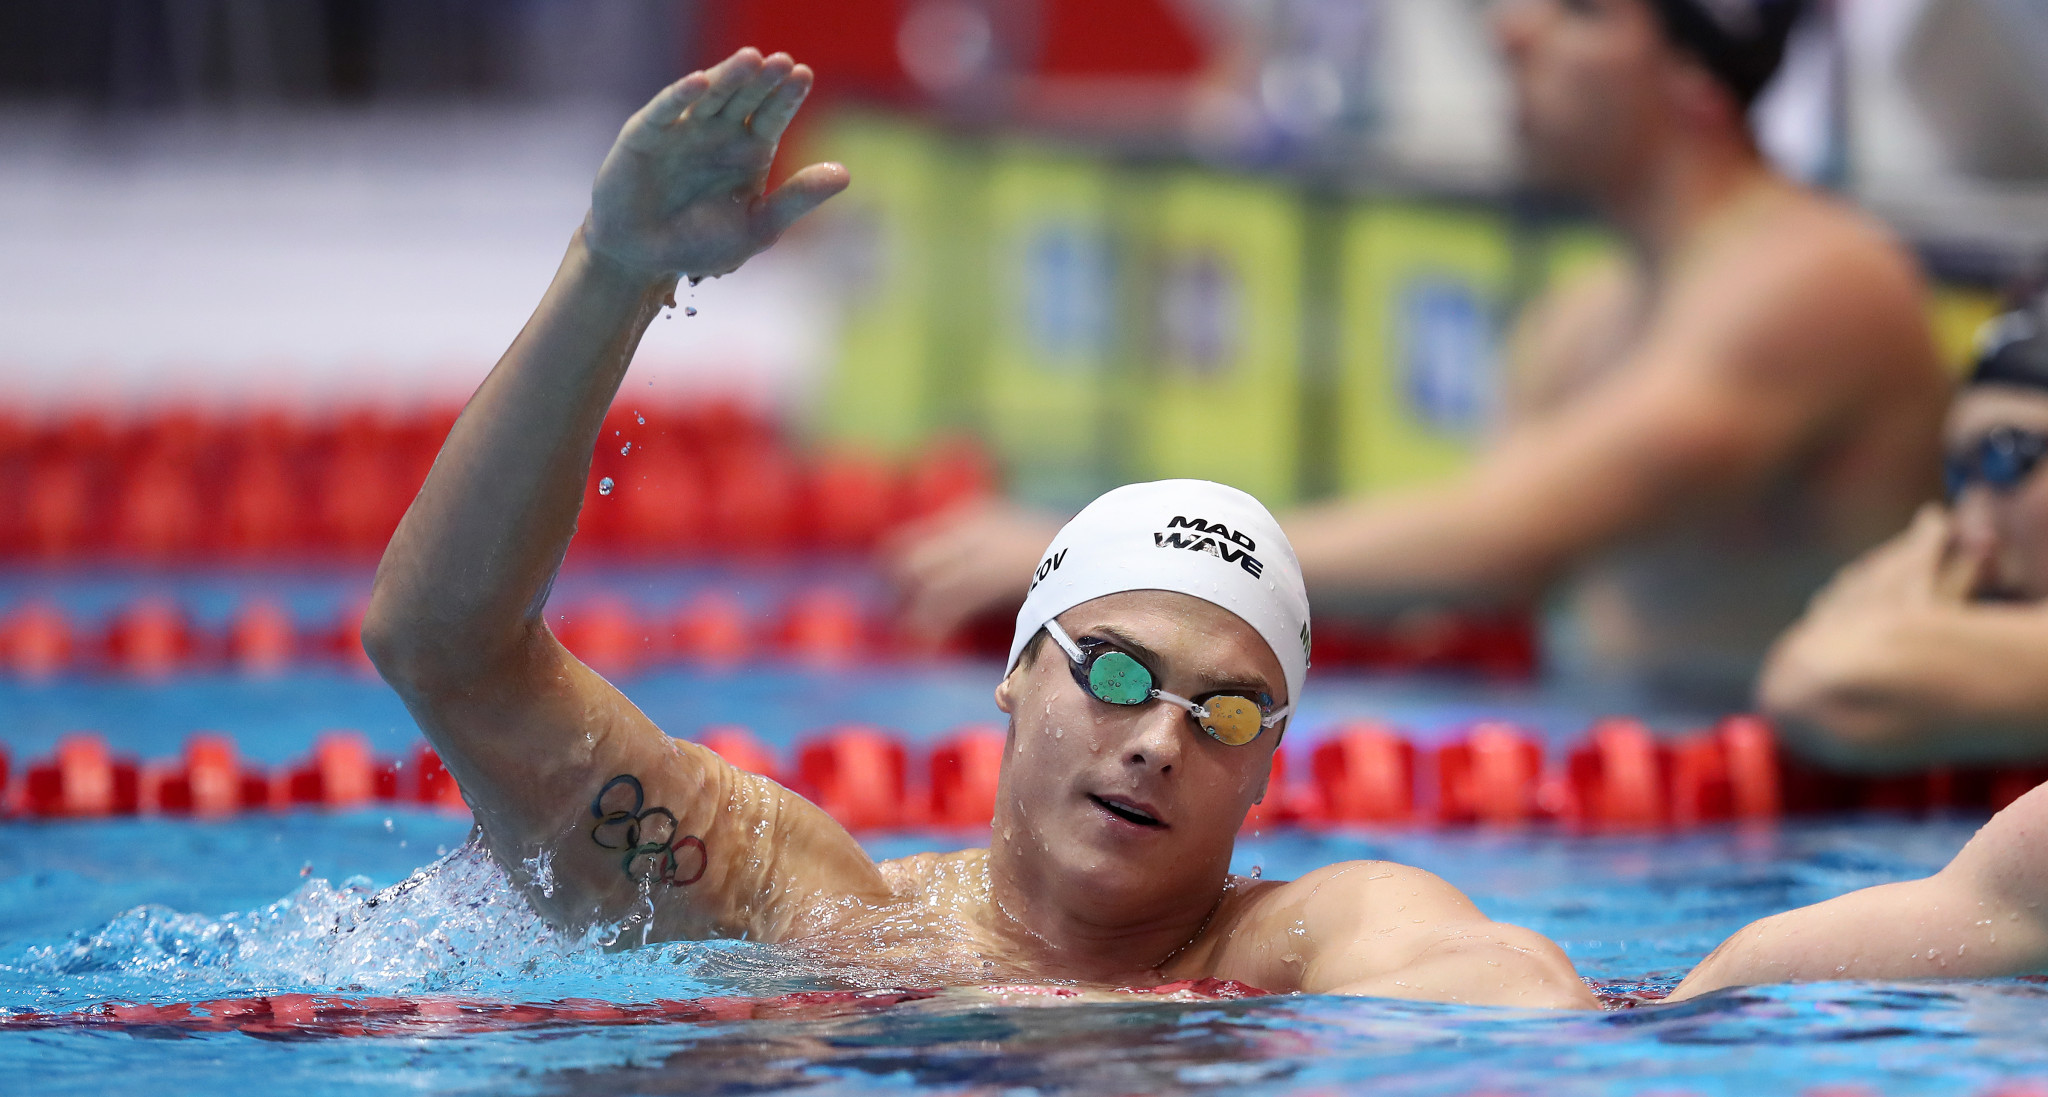 Morozov shines again with two more wins at FINA World Cup